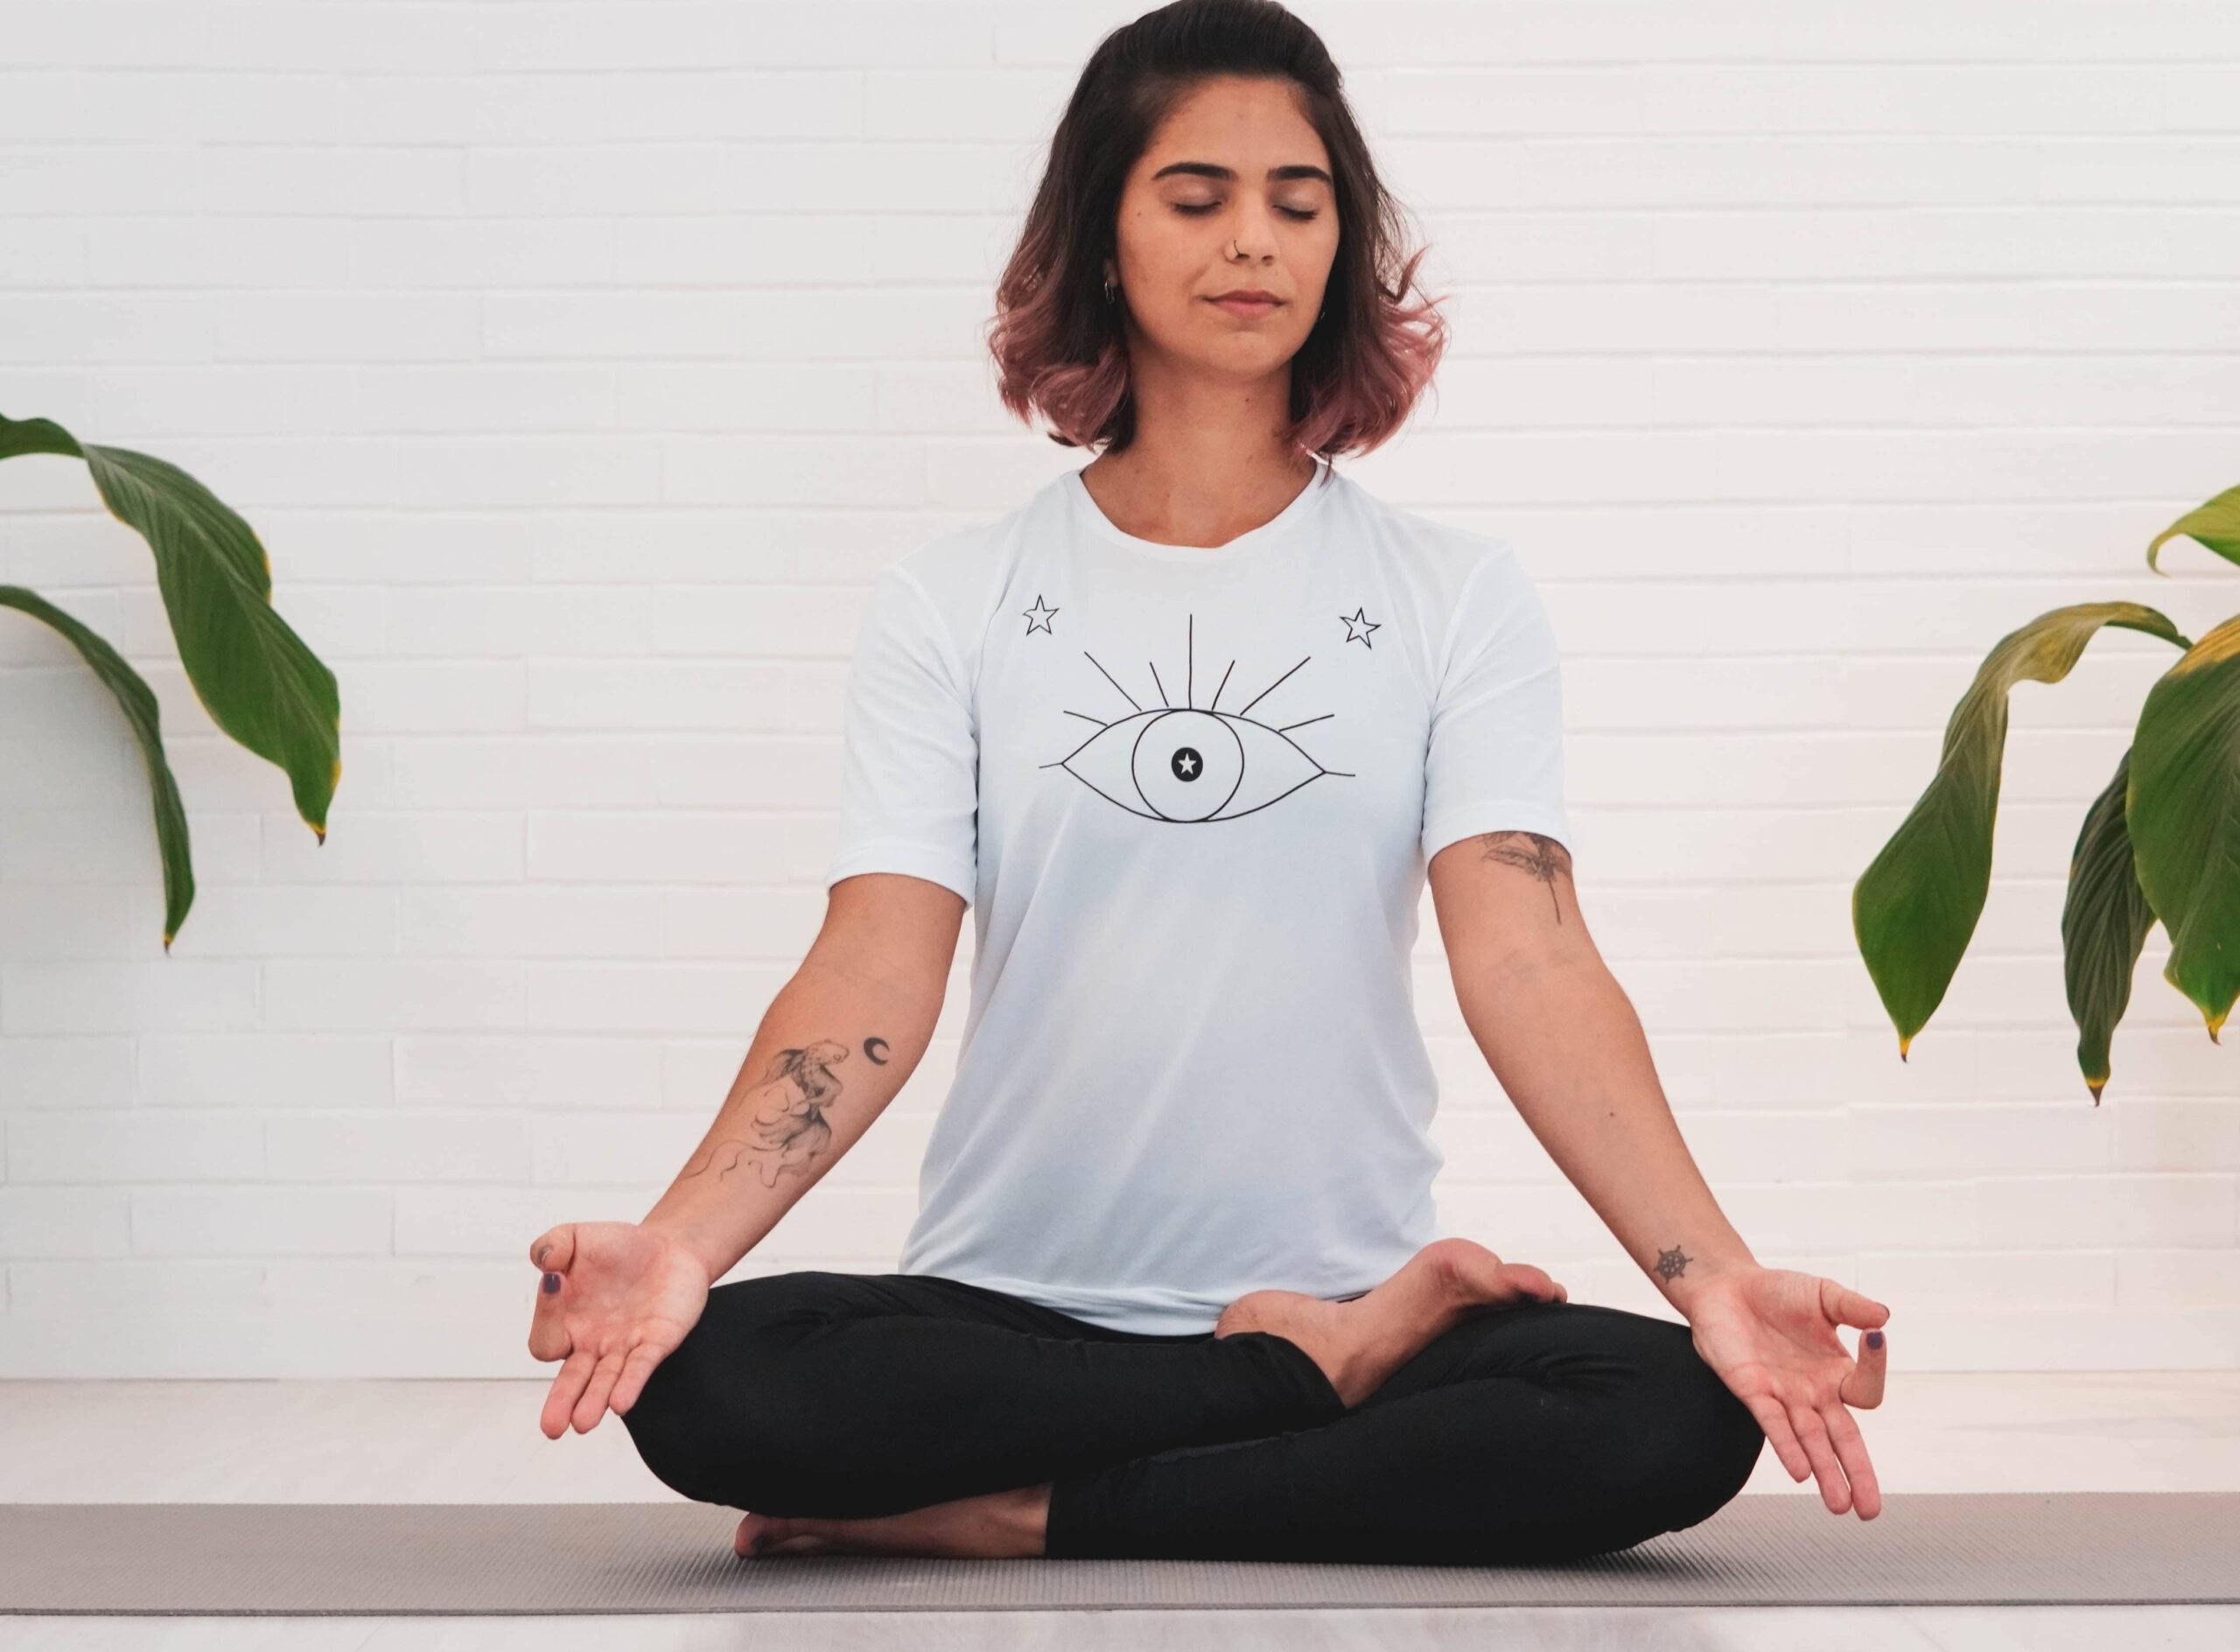 Yoga practitioner demonstrating deep breathing in a calming pose